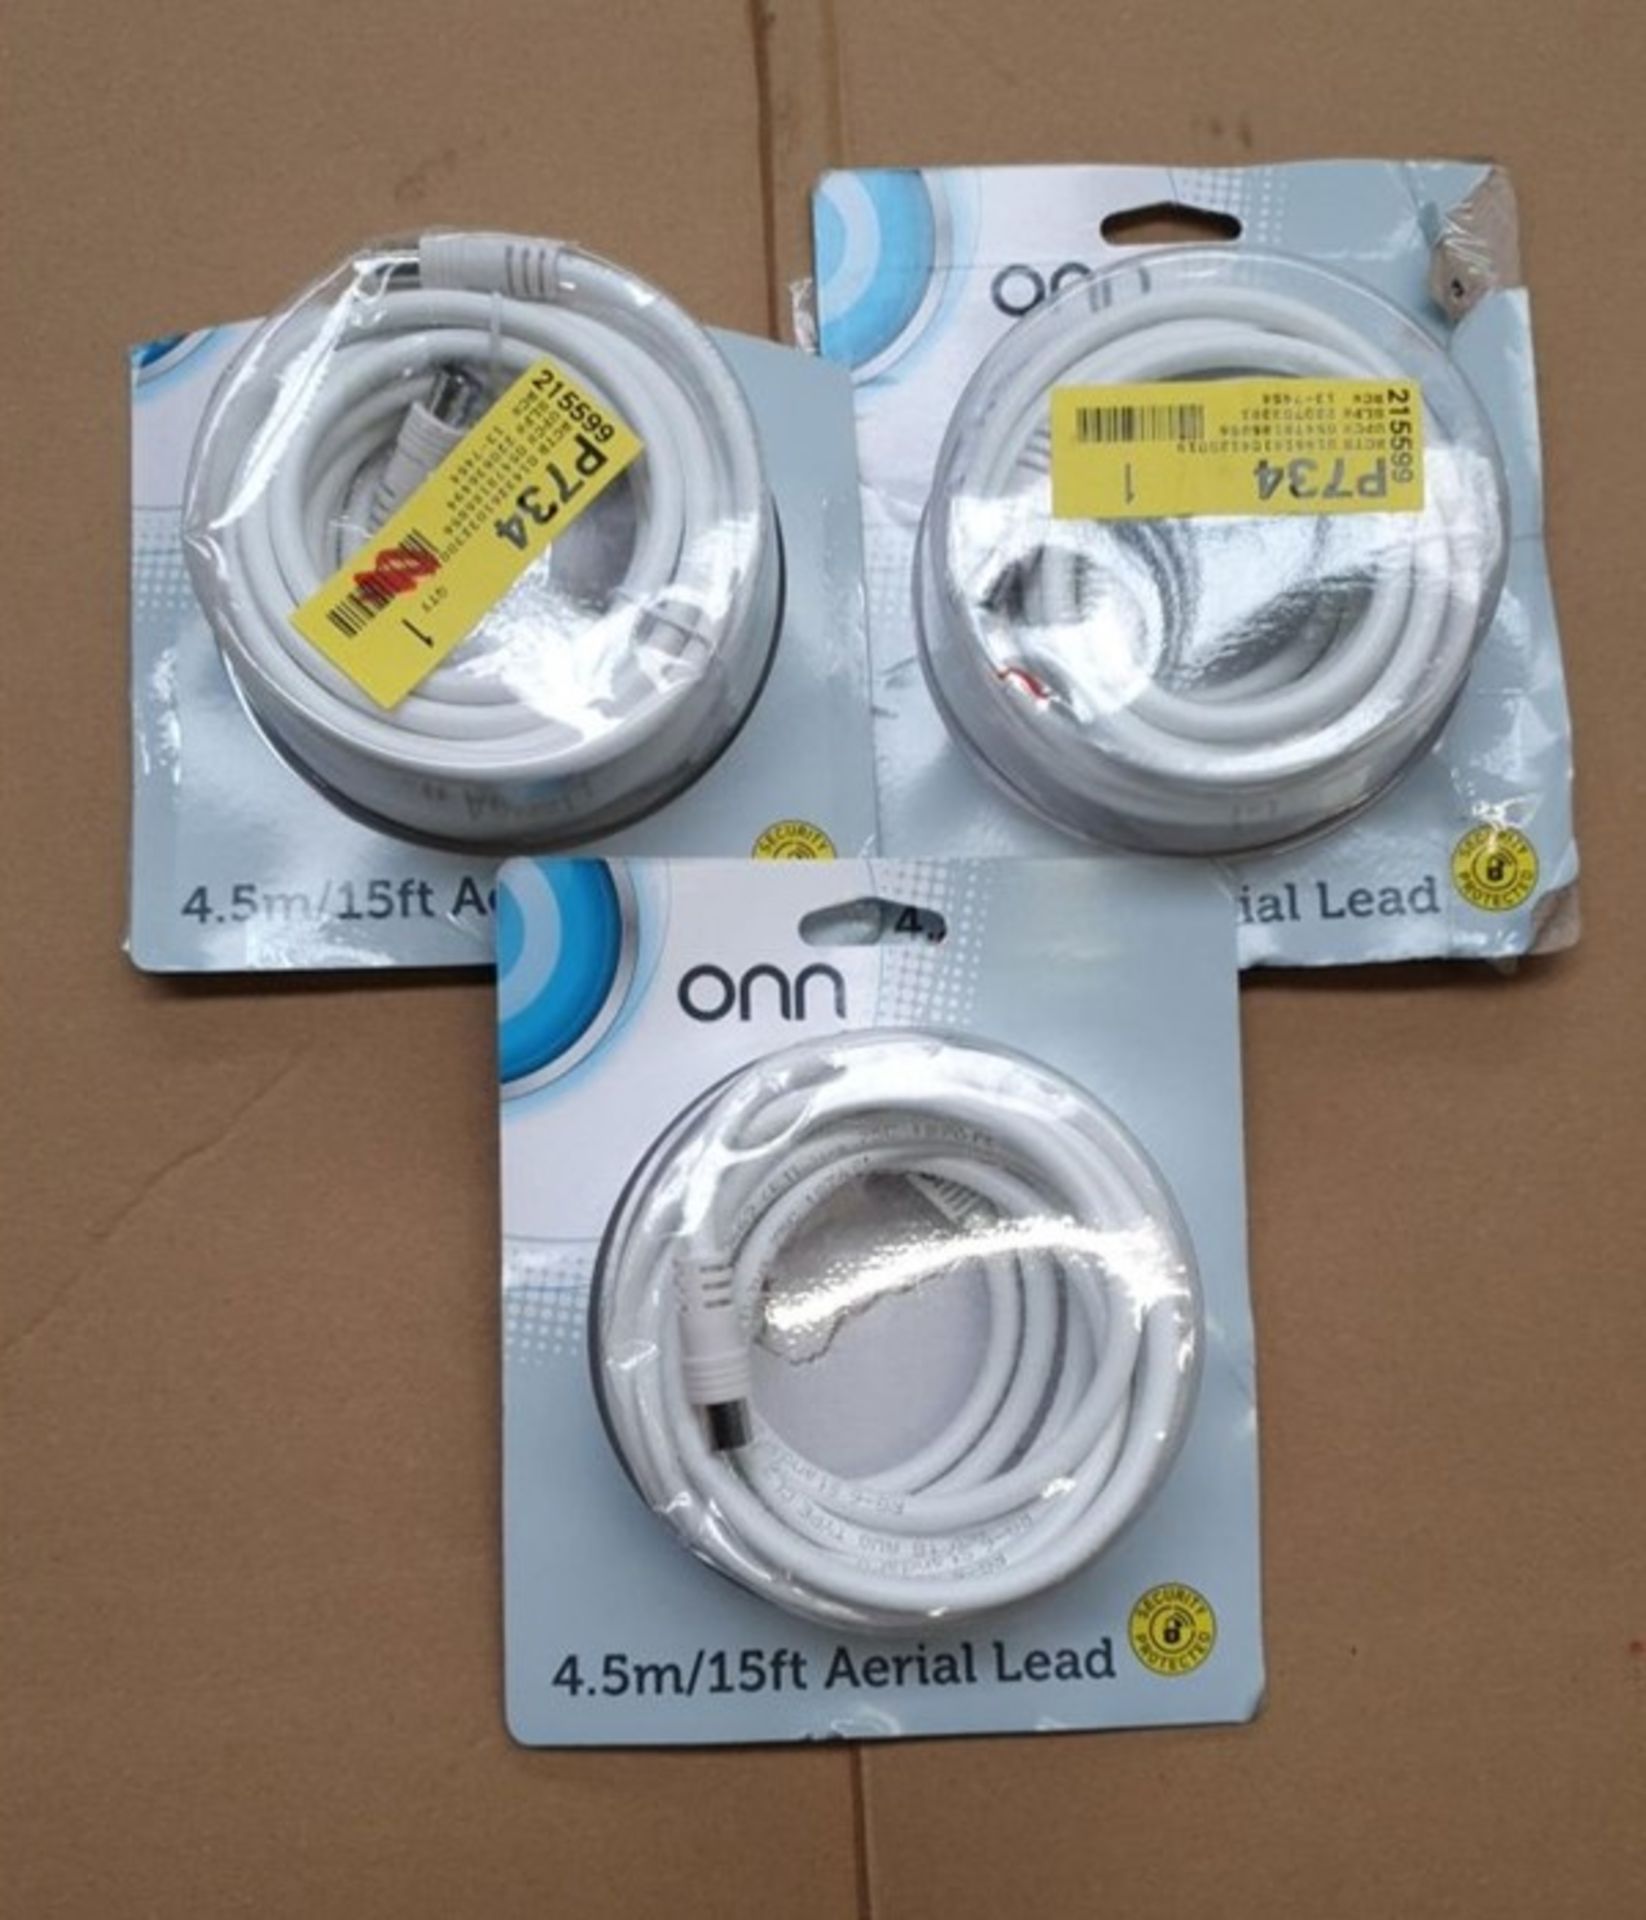 1 LOT TO CONTAIN 3 ONN 4.5M/15FT AERIAL LEADS / BL -5599 / RRP £9.87 (VIEWING HIGHLY RECOMMENDED)